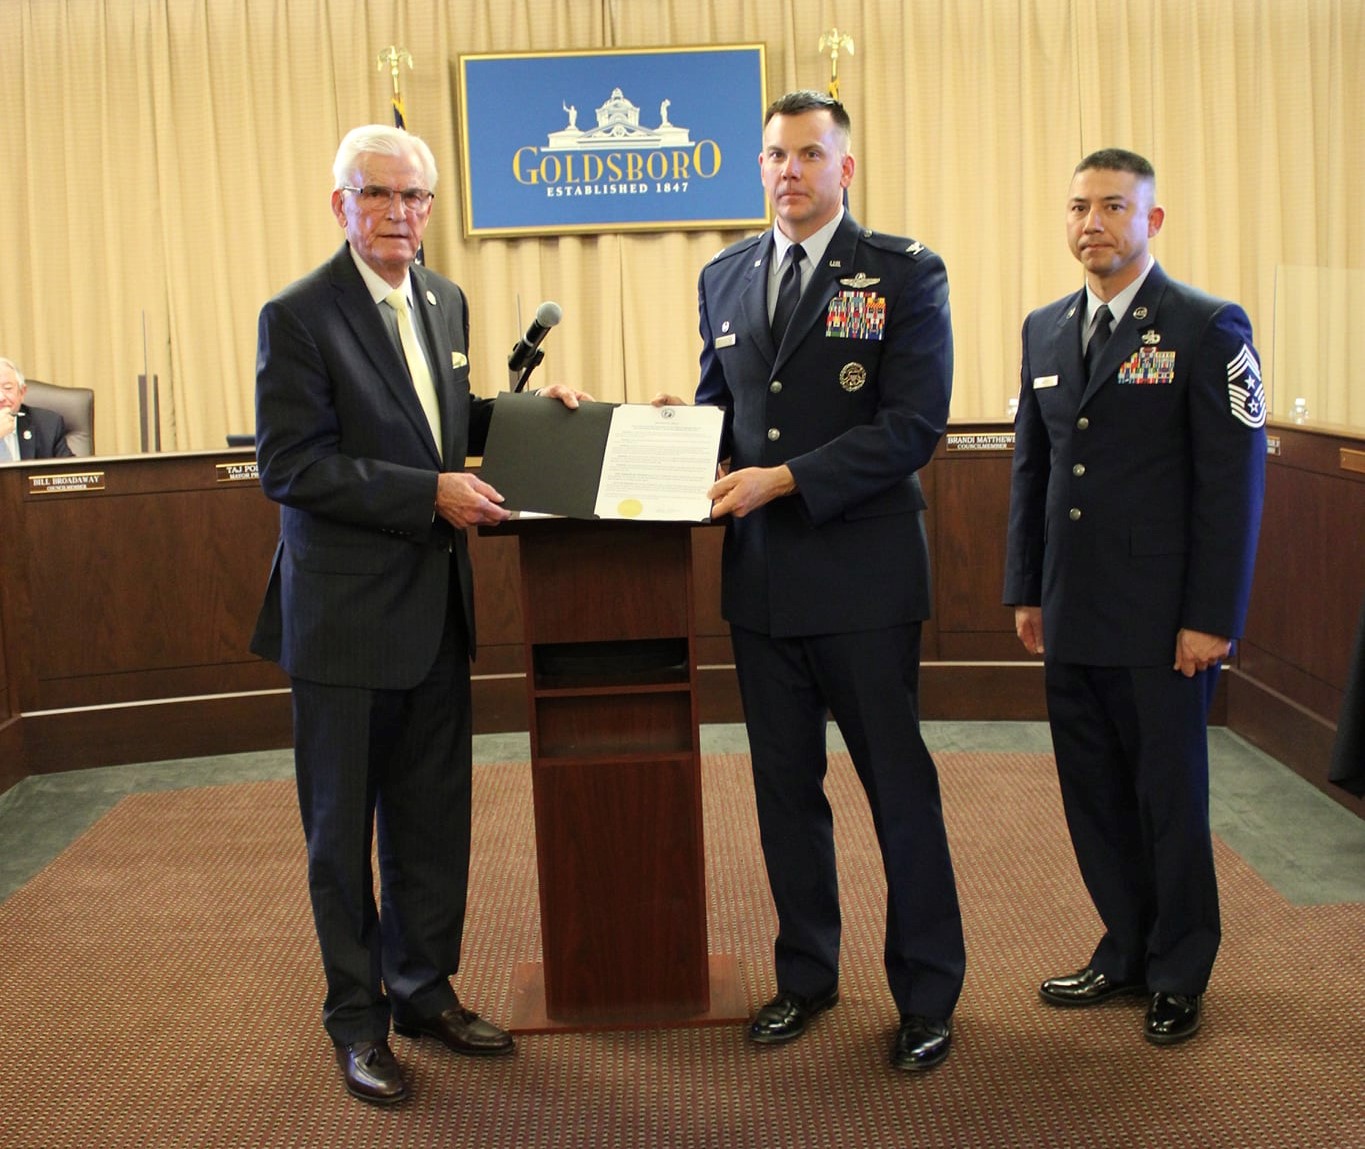 Goldsboro City Council Pledges Support For Ukraine And The Men And Women Of SJAFB